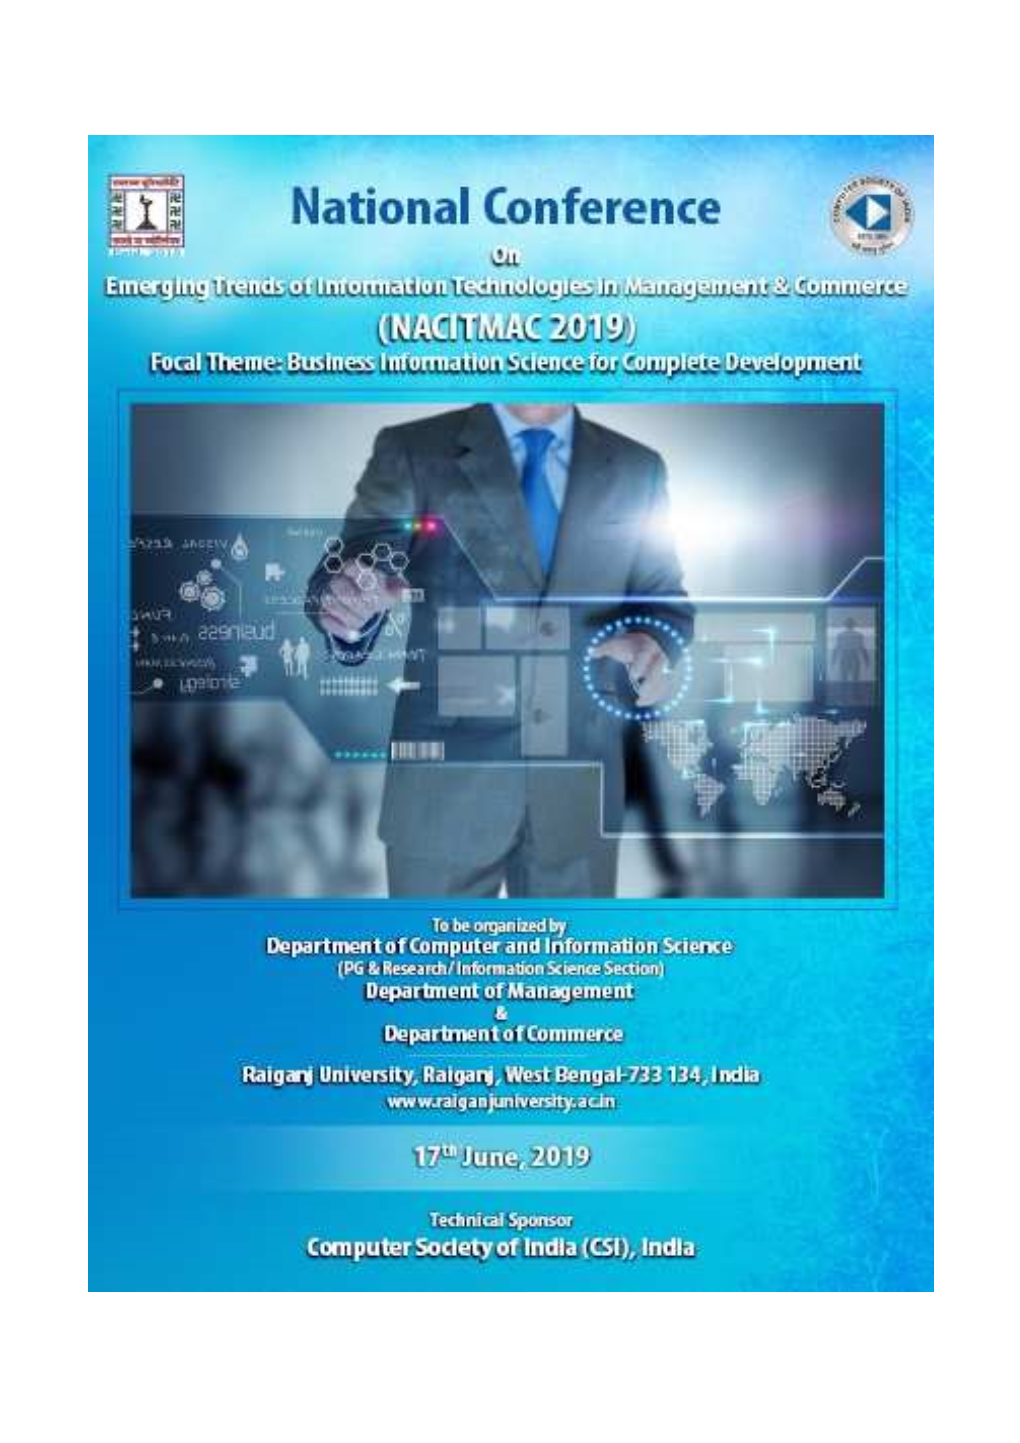 NACITMAC 2019) Focal Theme: Business Information Science for Complete Development